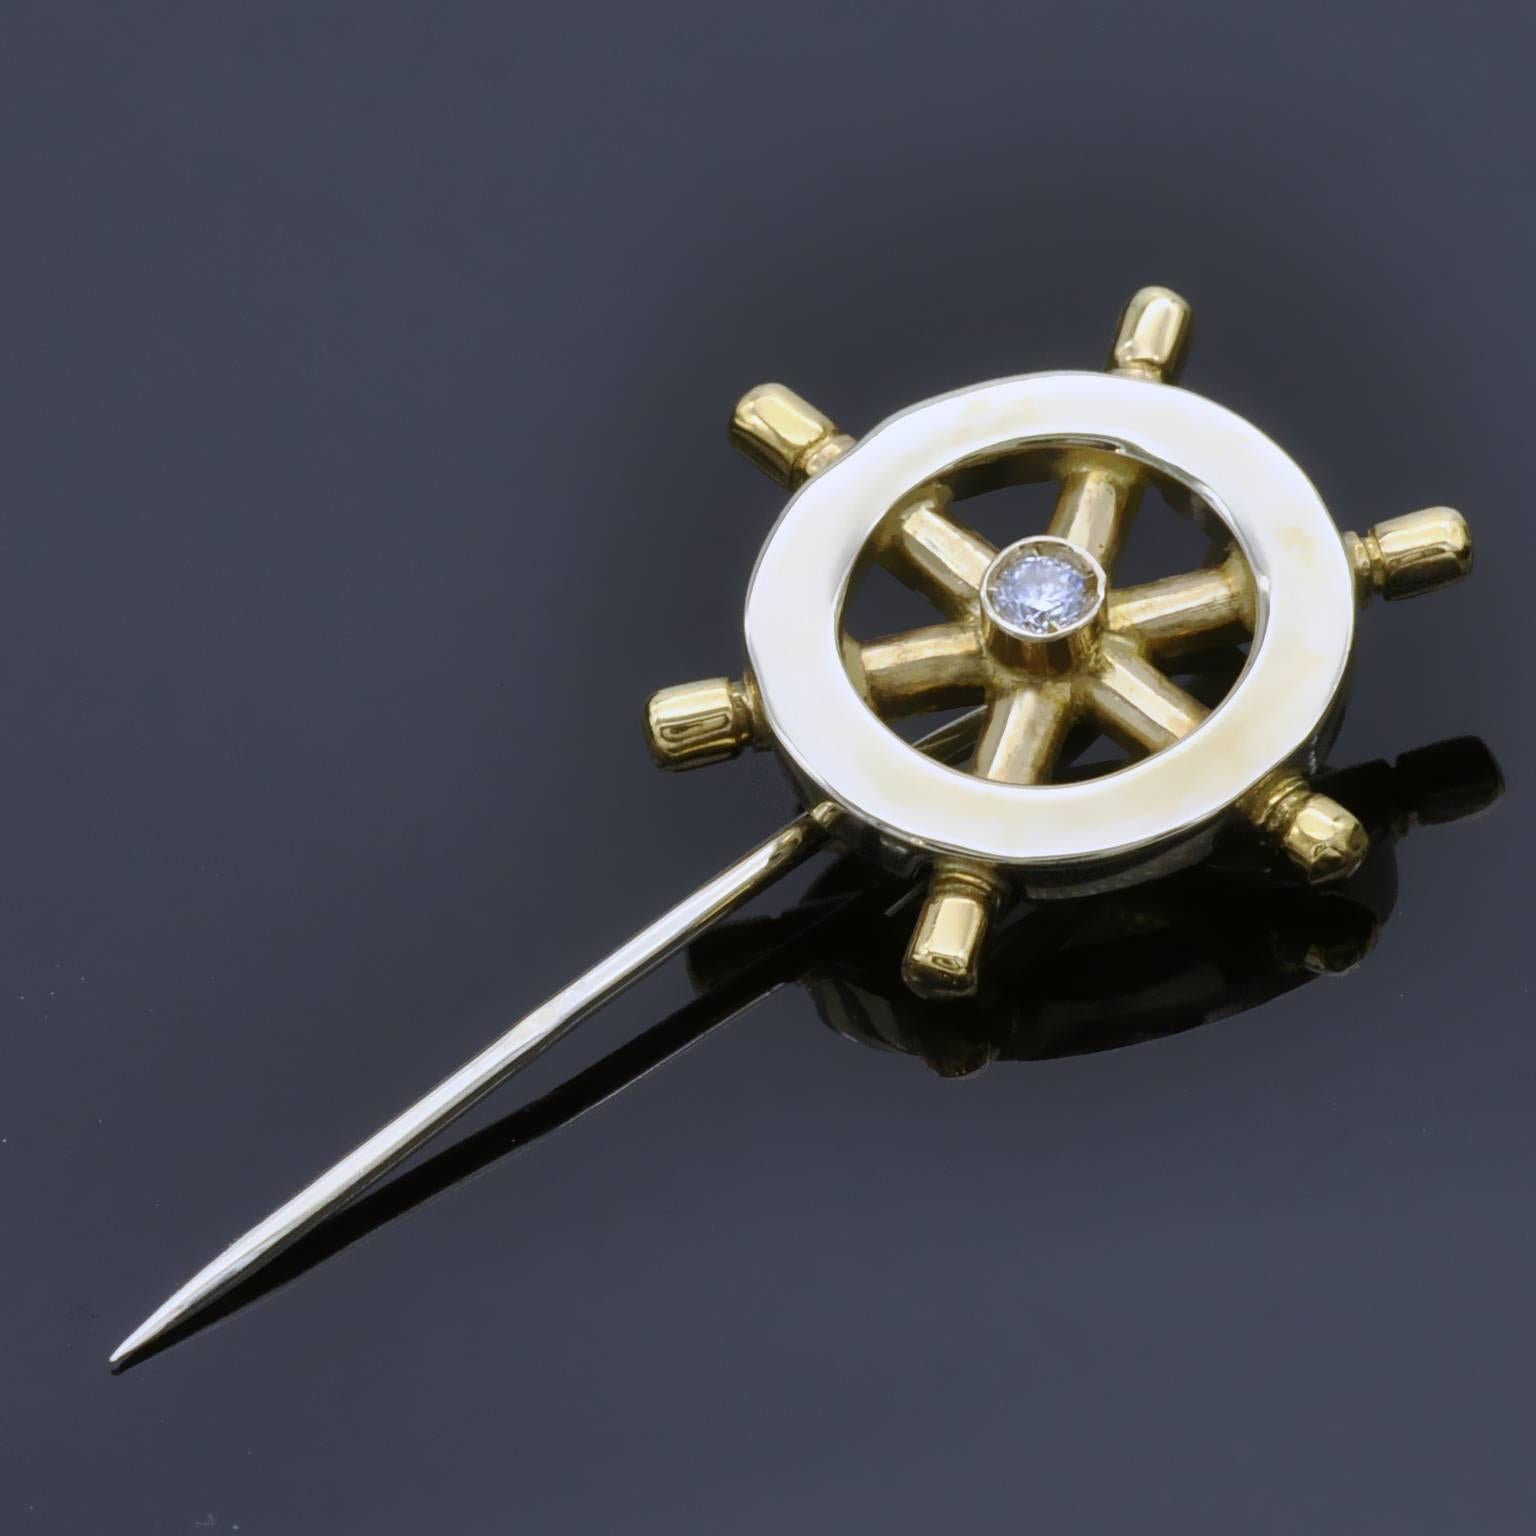 Elegant sailing boat helm pin made in 18kt white and yellow gold. In it center a round brilliant cut diamond. 